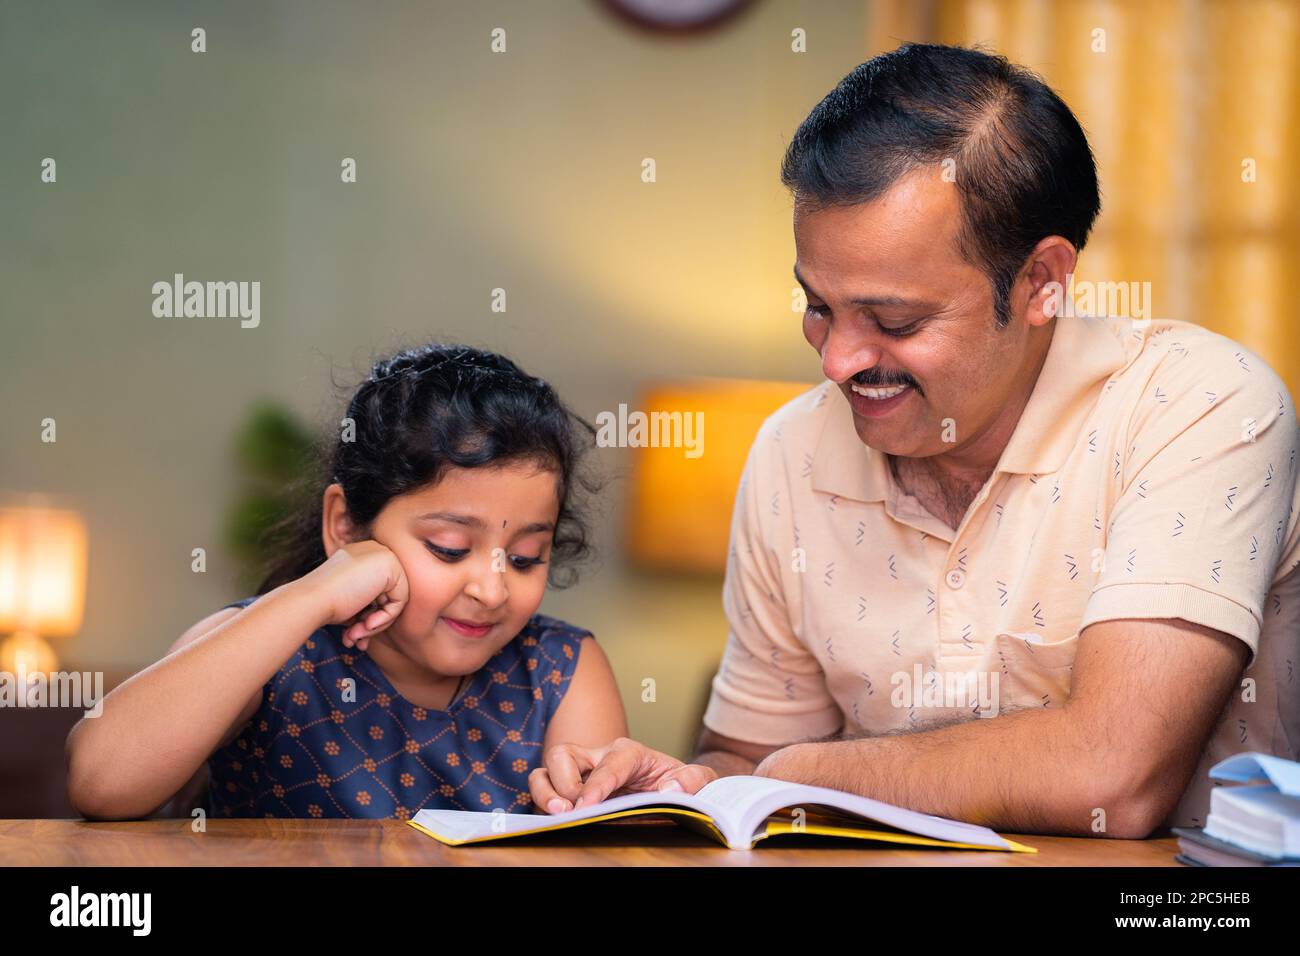 focus on father, Father helping his daughter for reading book at home during evening - concept of education, caring family and responsibility Stock Photo